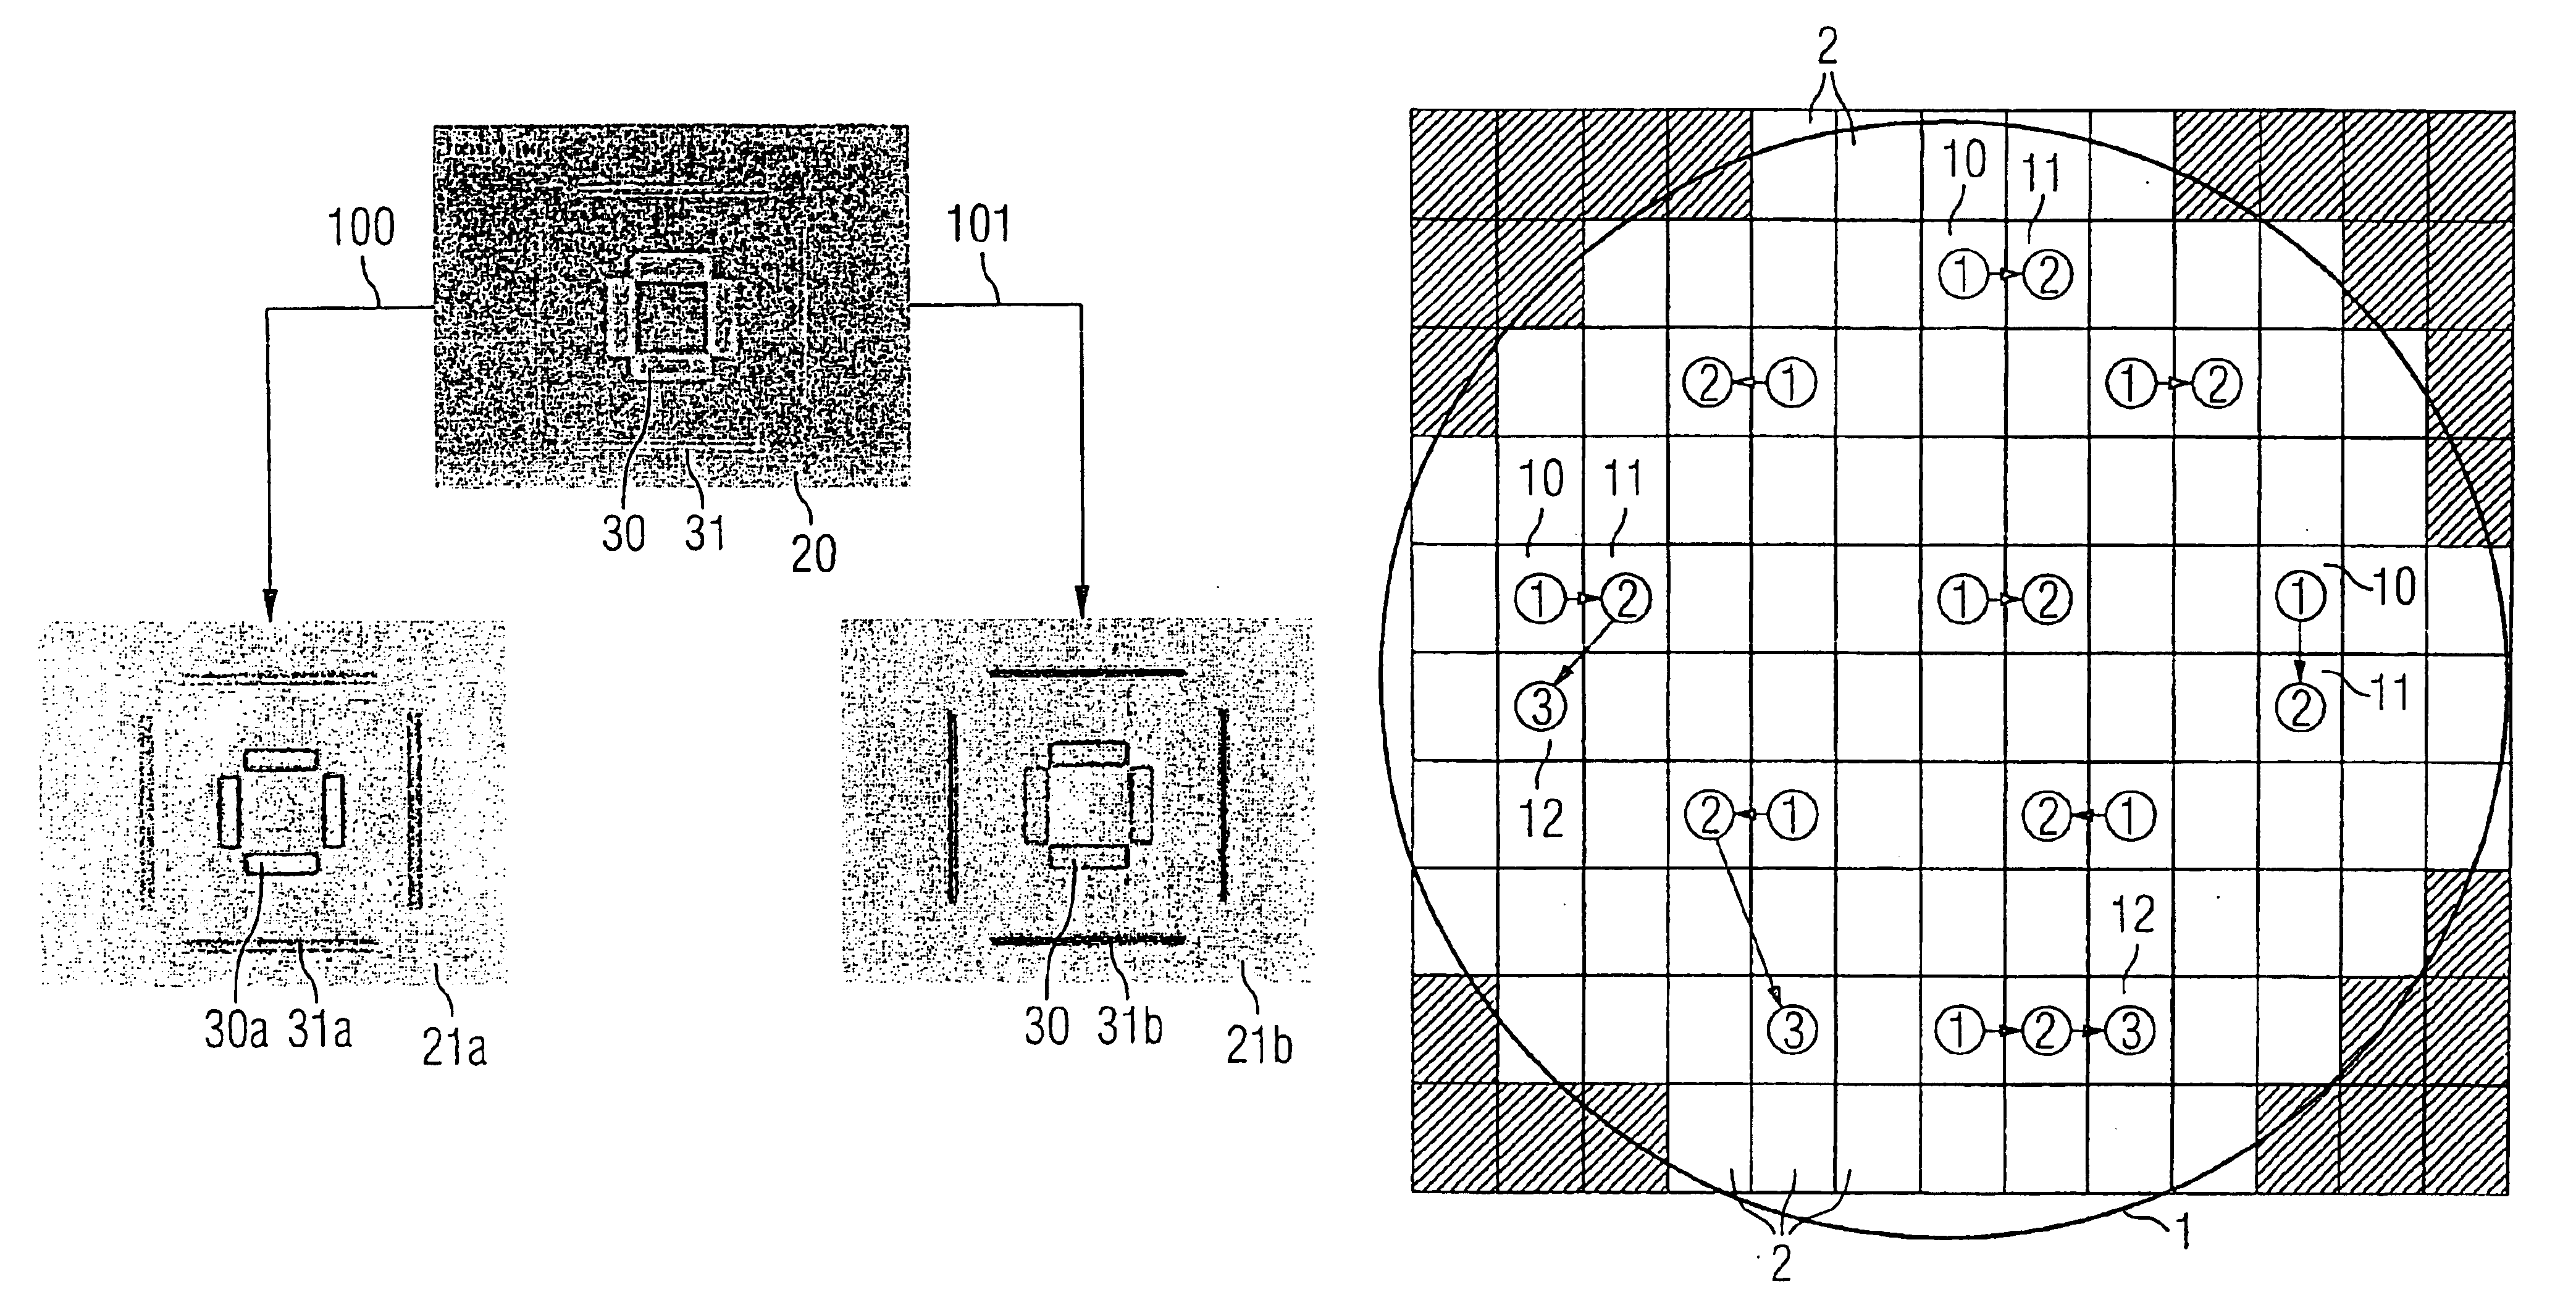 Method for performing an alignment measurement of two patterns in different layers on a semiconductor wafer